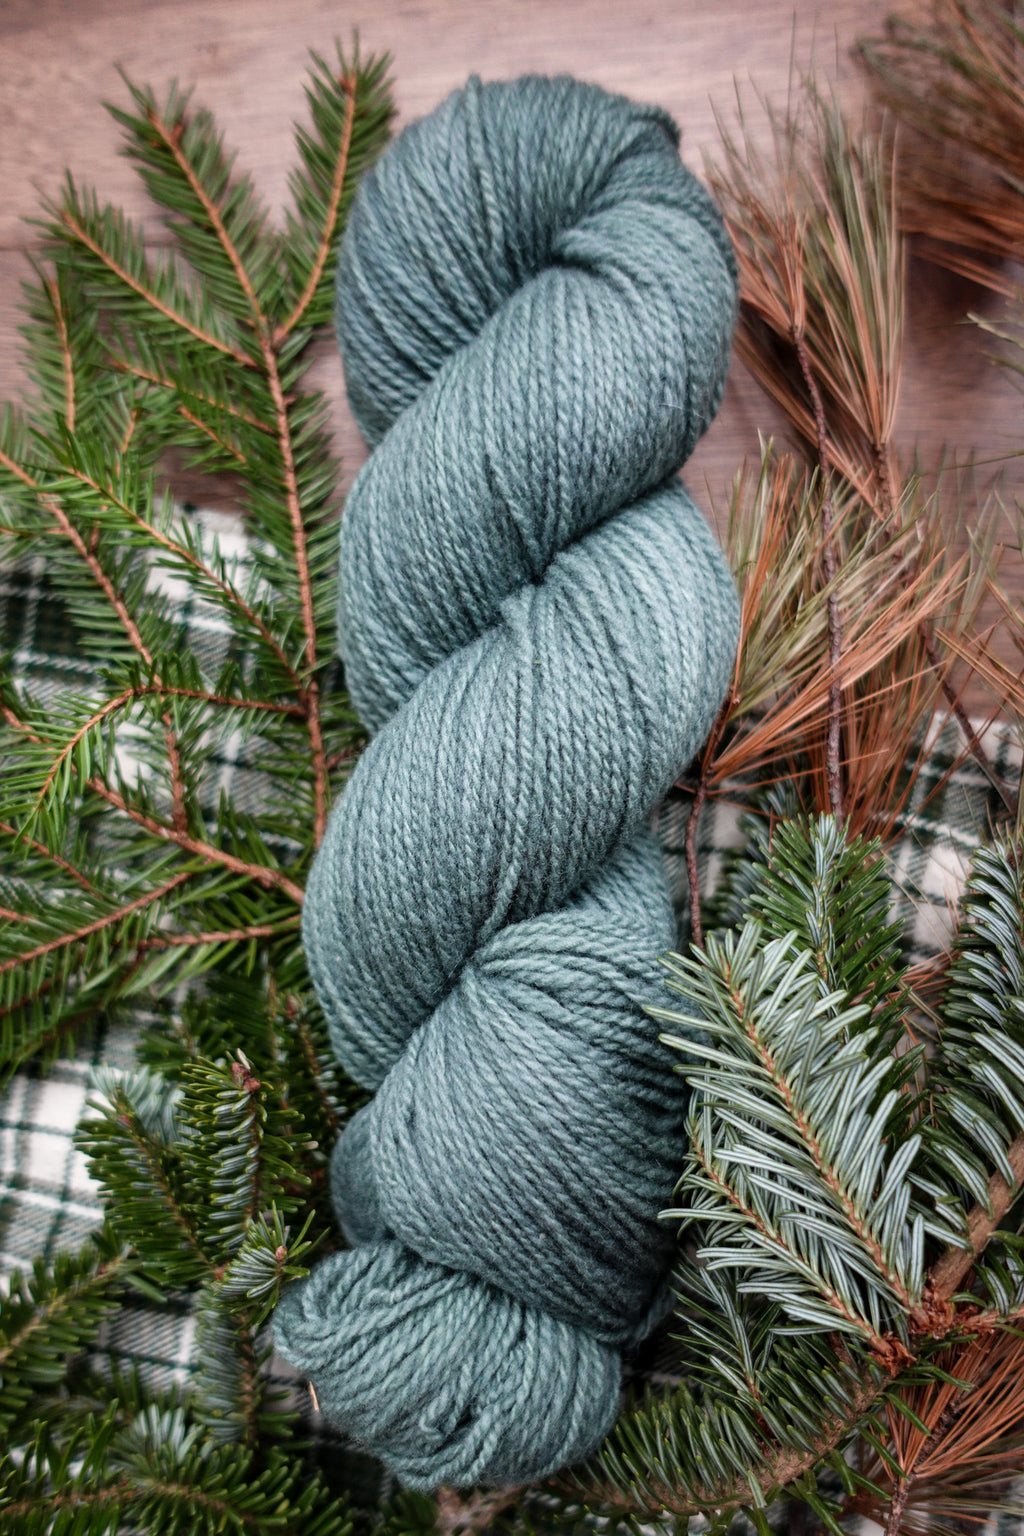 A skein of sport weight yarn has been hand dyed blue green. It lays on a tabletop next to spruce branches.